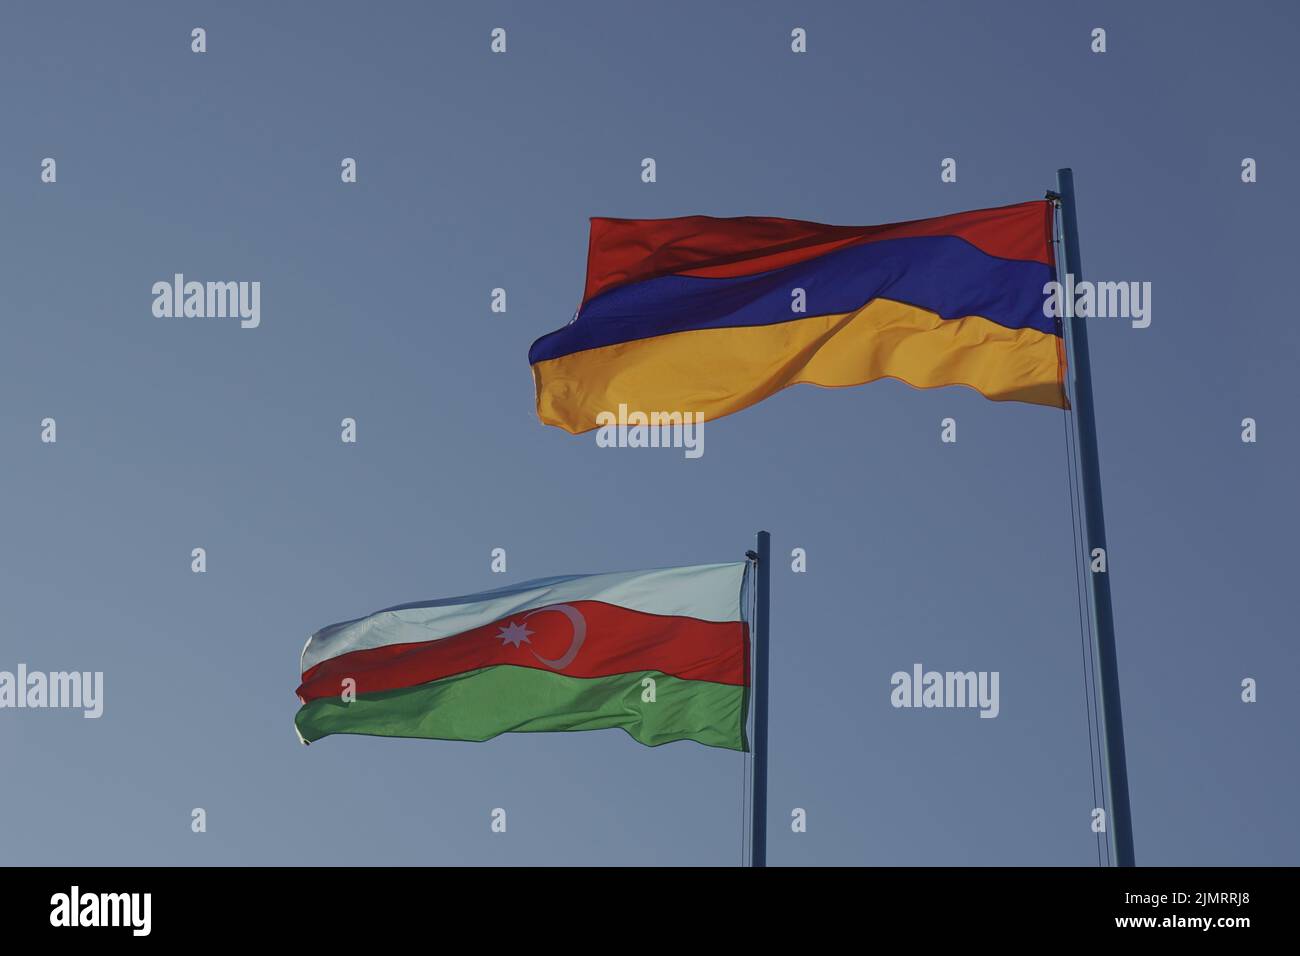 The national flags of Azerbaijan and Armenia are fluttering in the wind. State symbols Stock Photo